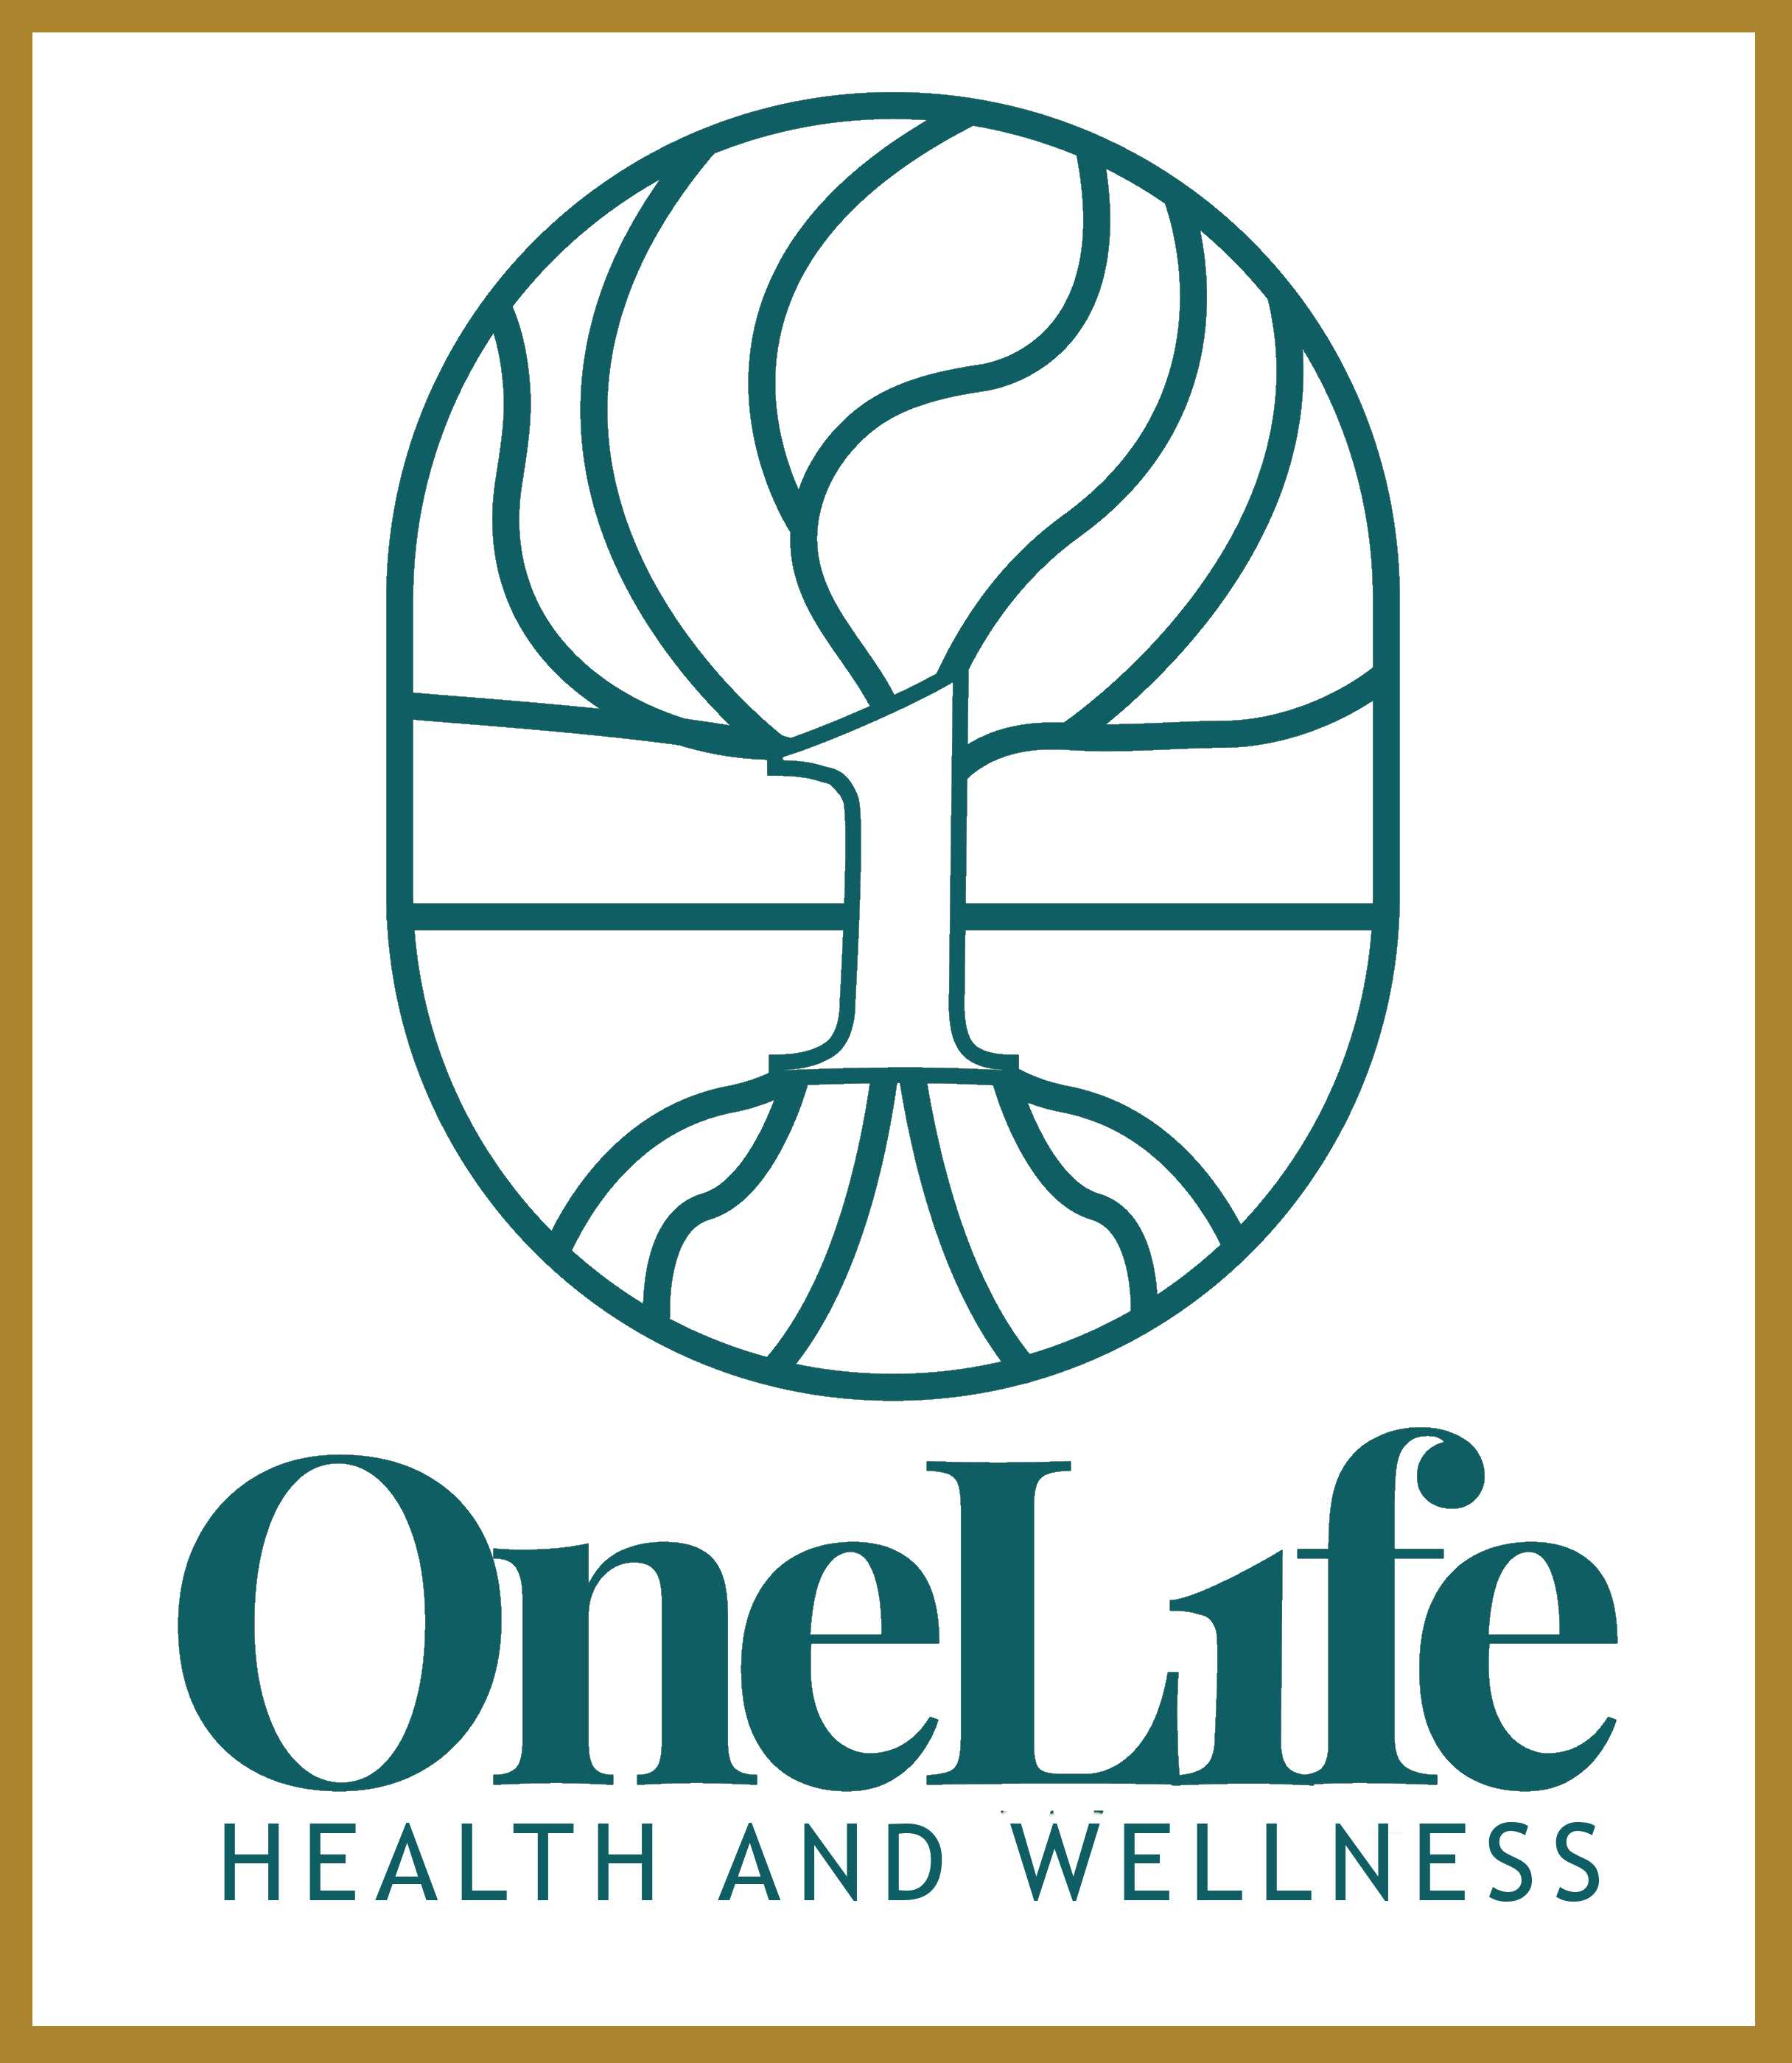 OneL1fe Health and Wellness coaching logo with yellow border